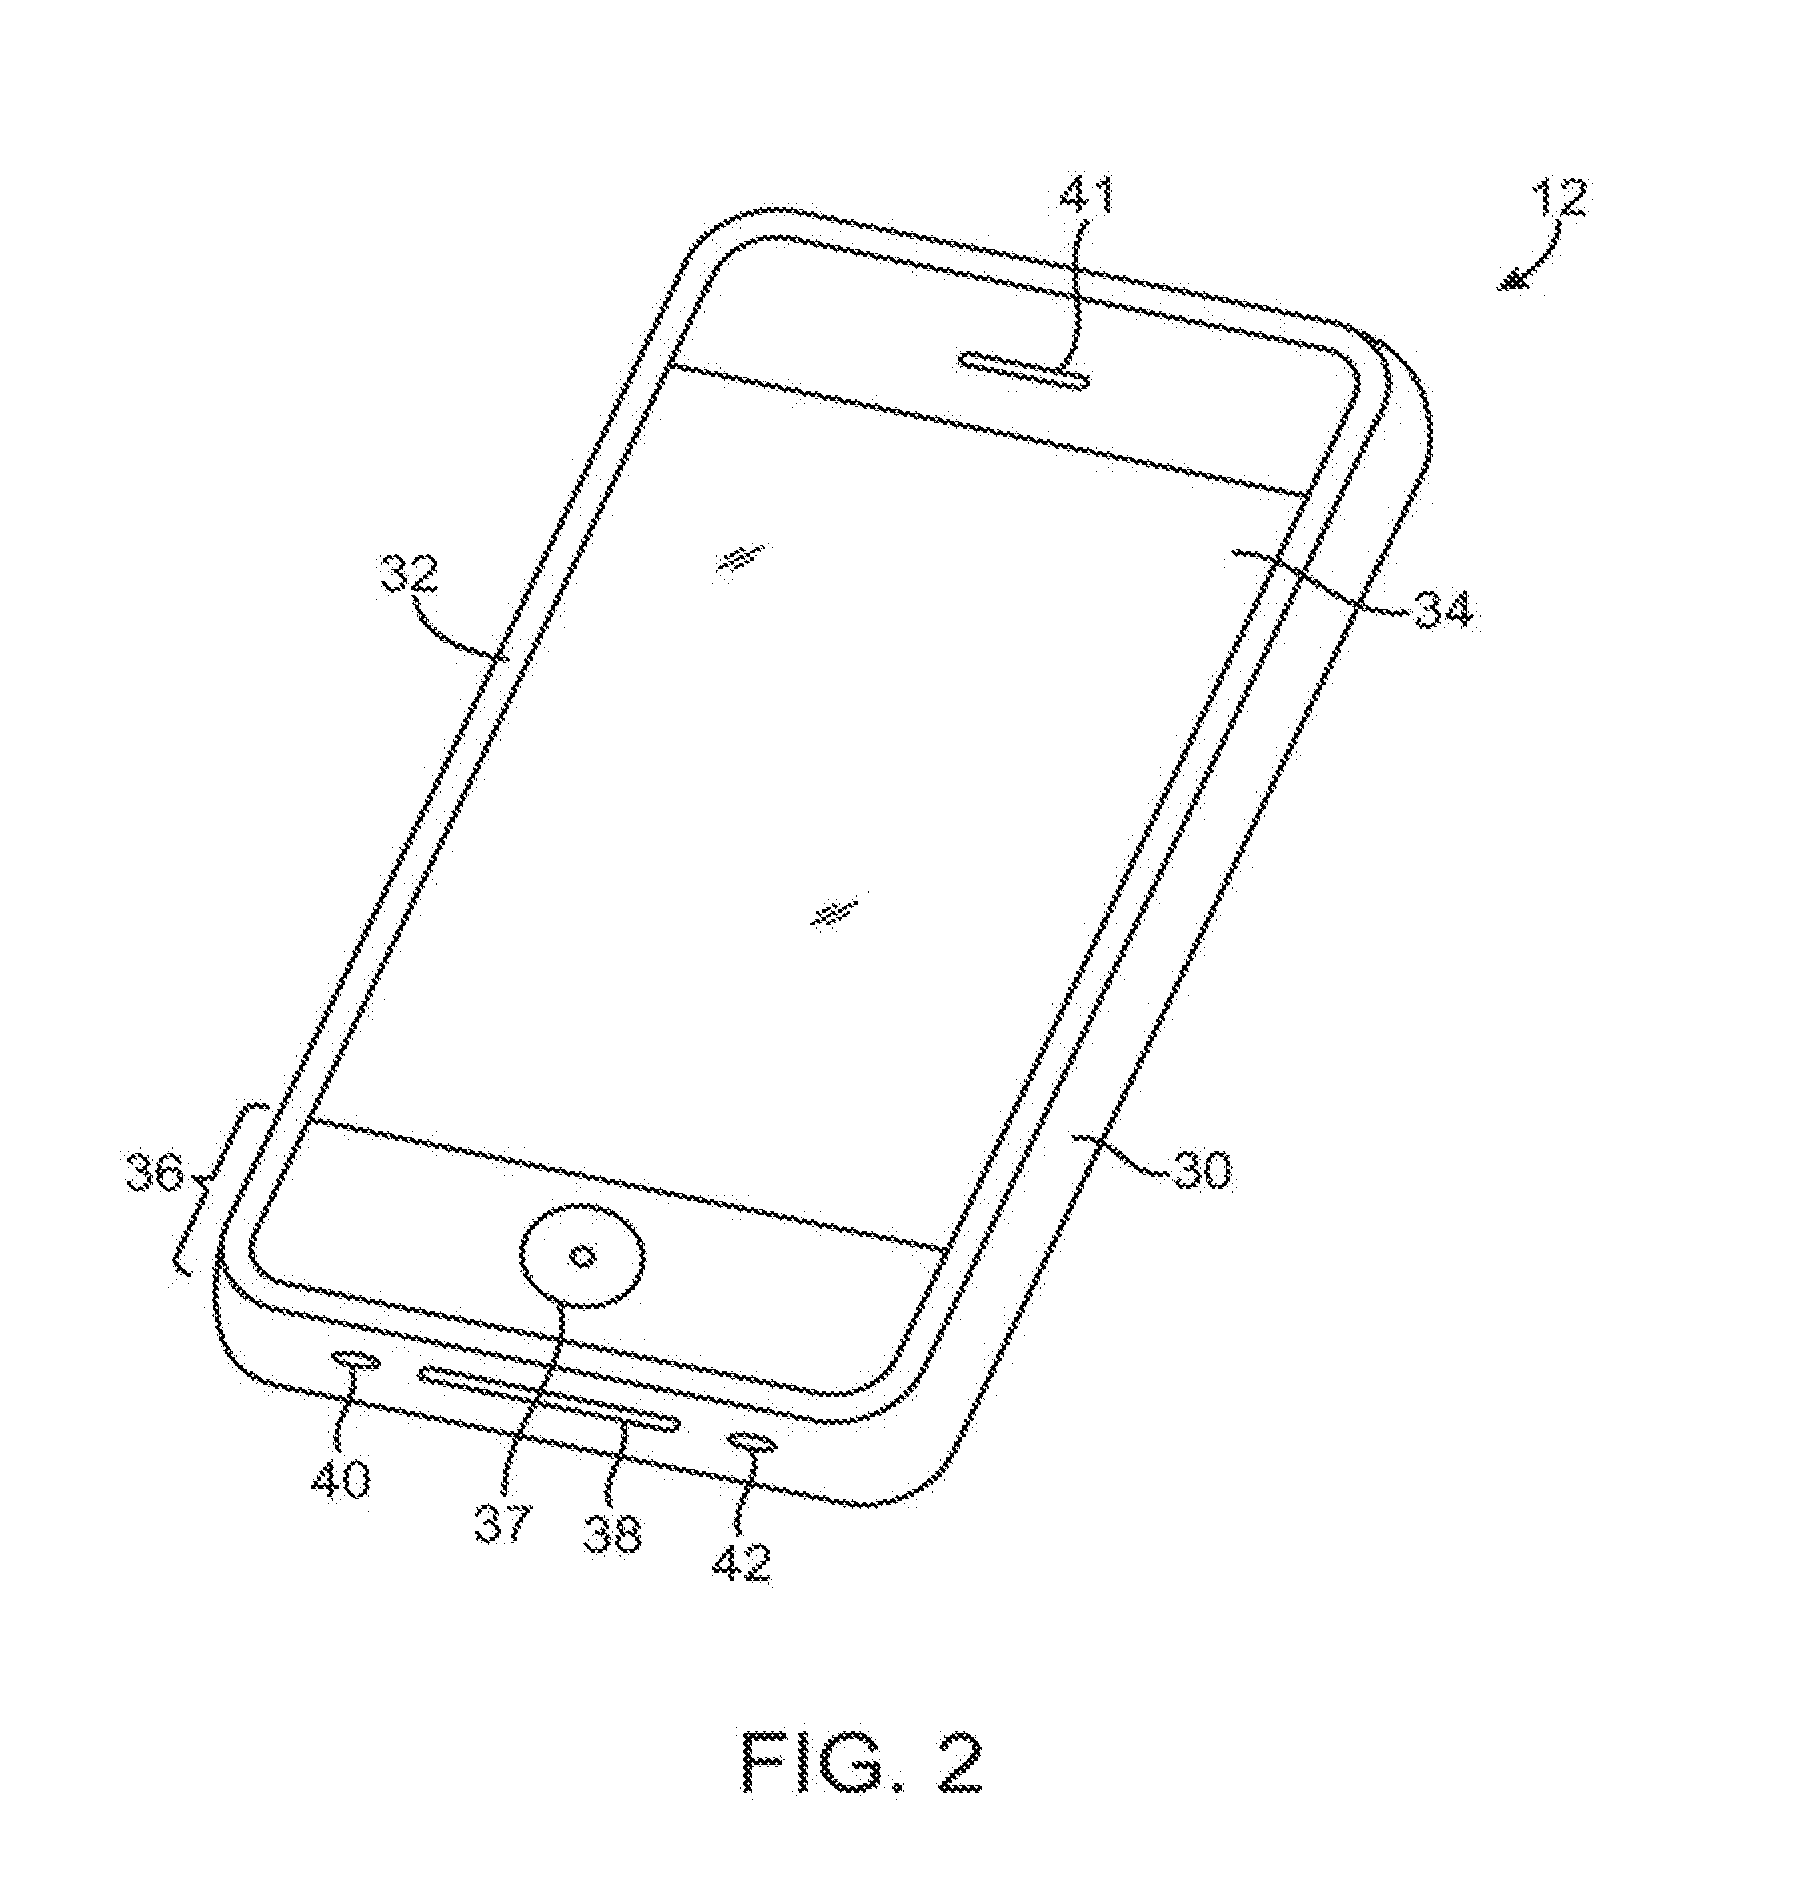 Electronic devices with voice command and contextual data processing capabilities